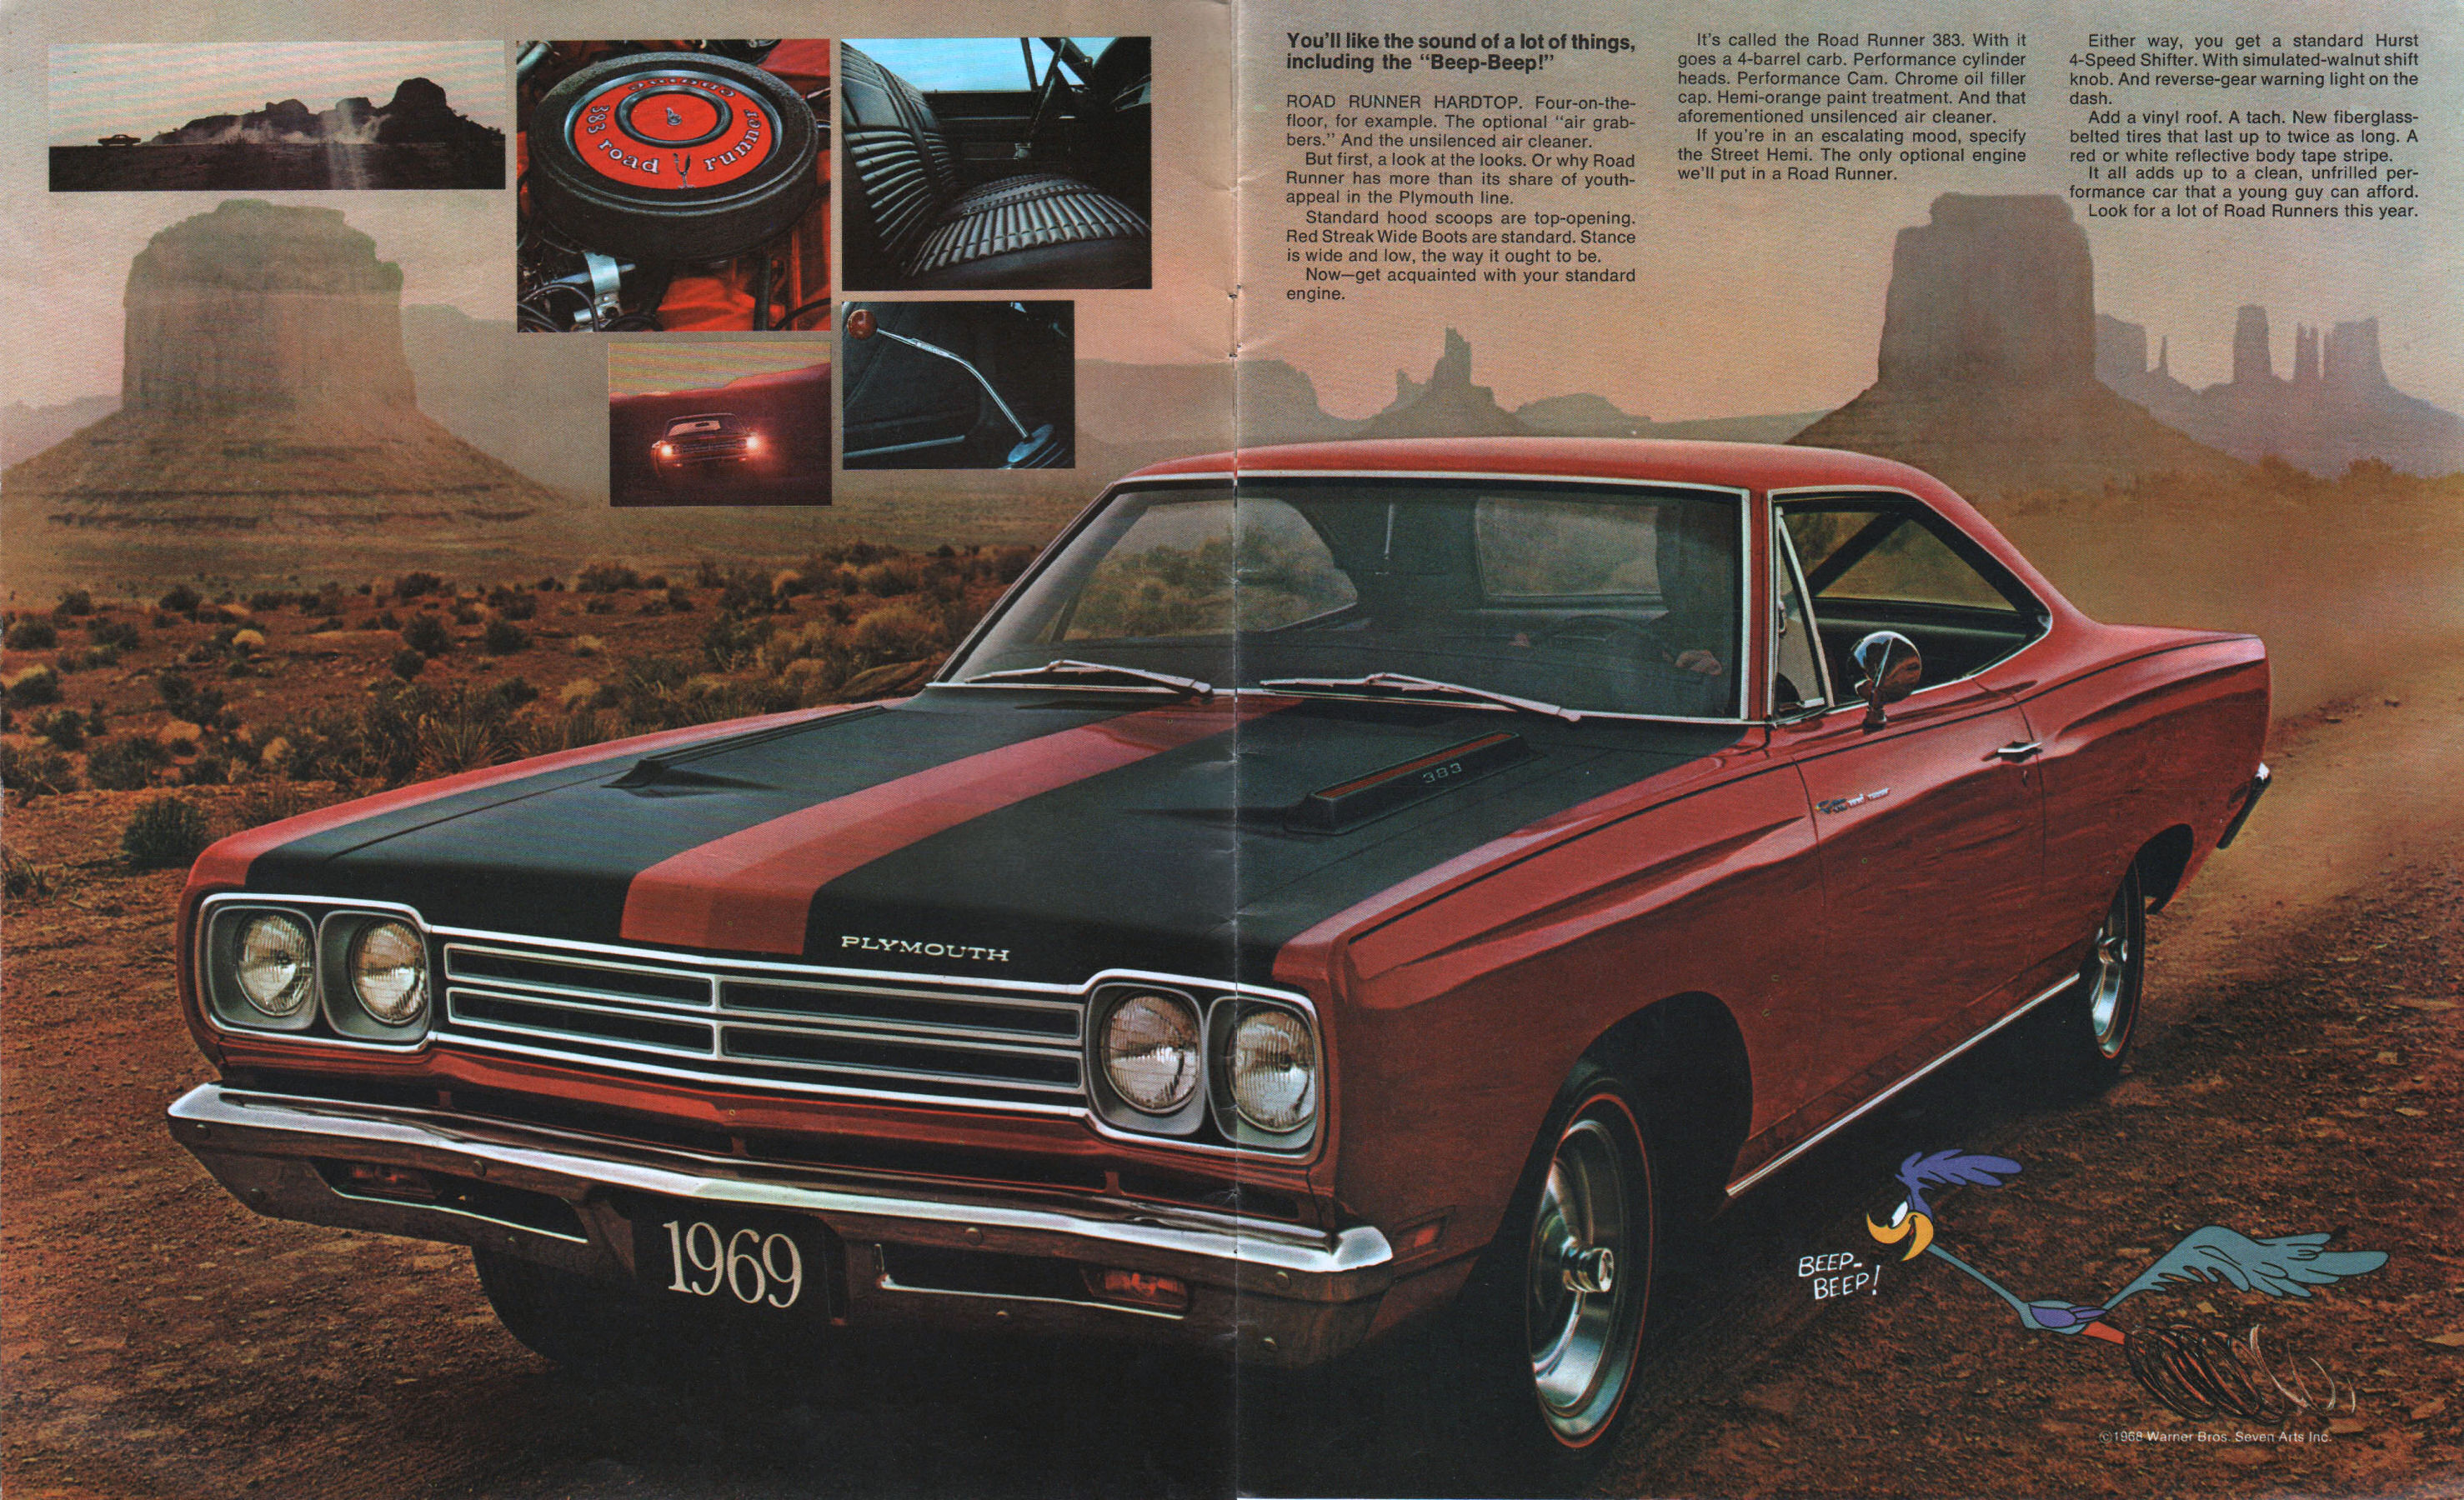 1969_Plymouth_Belvedere-06-07